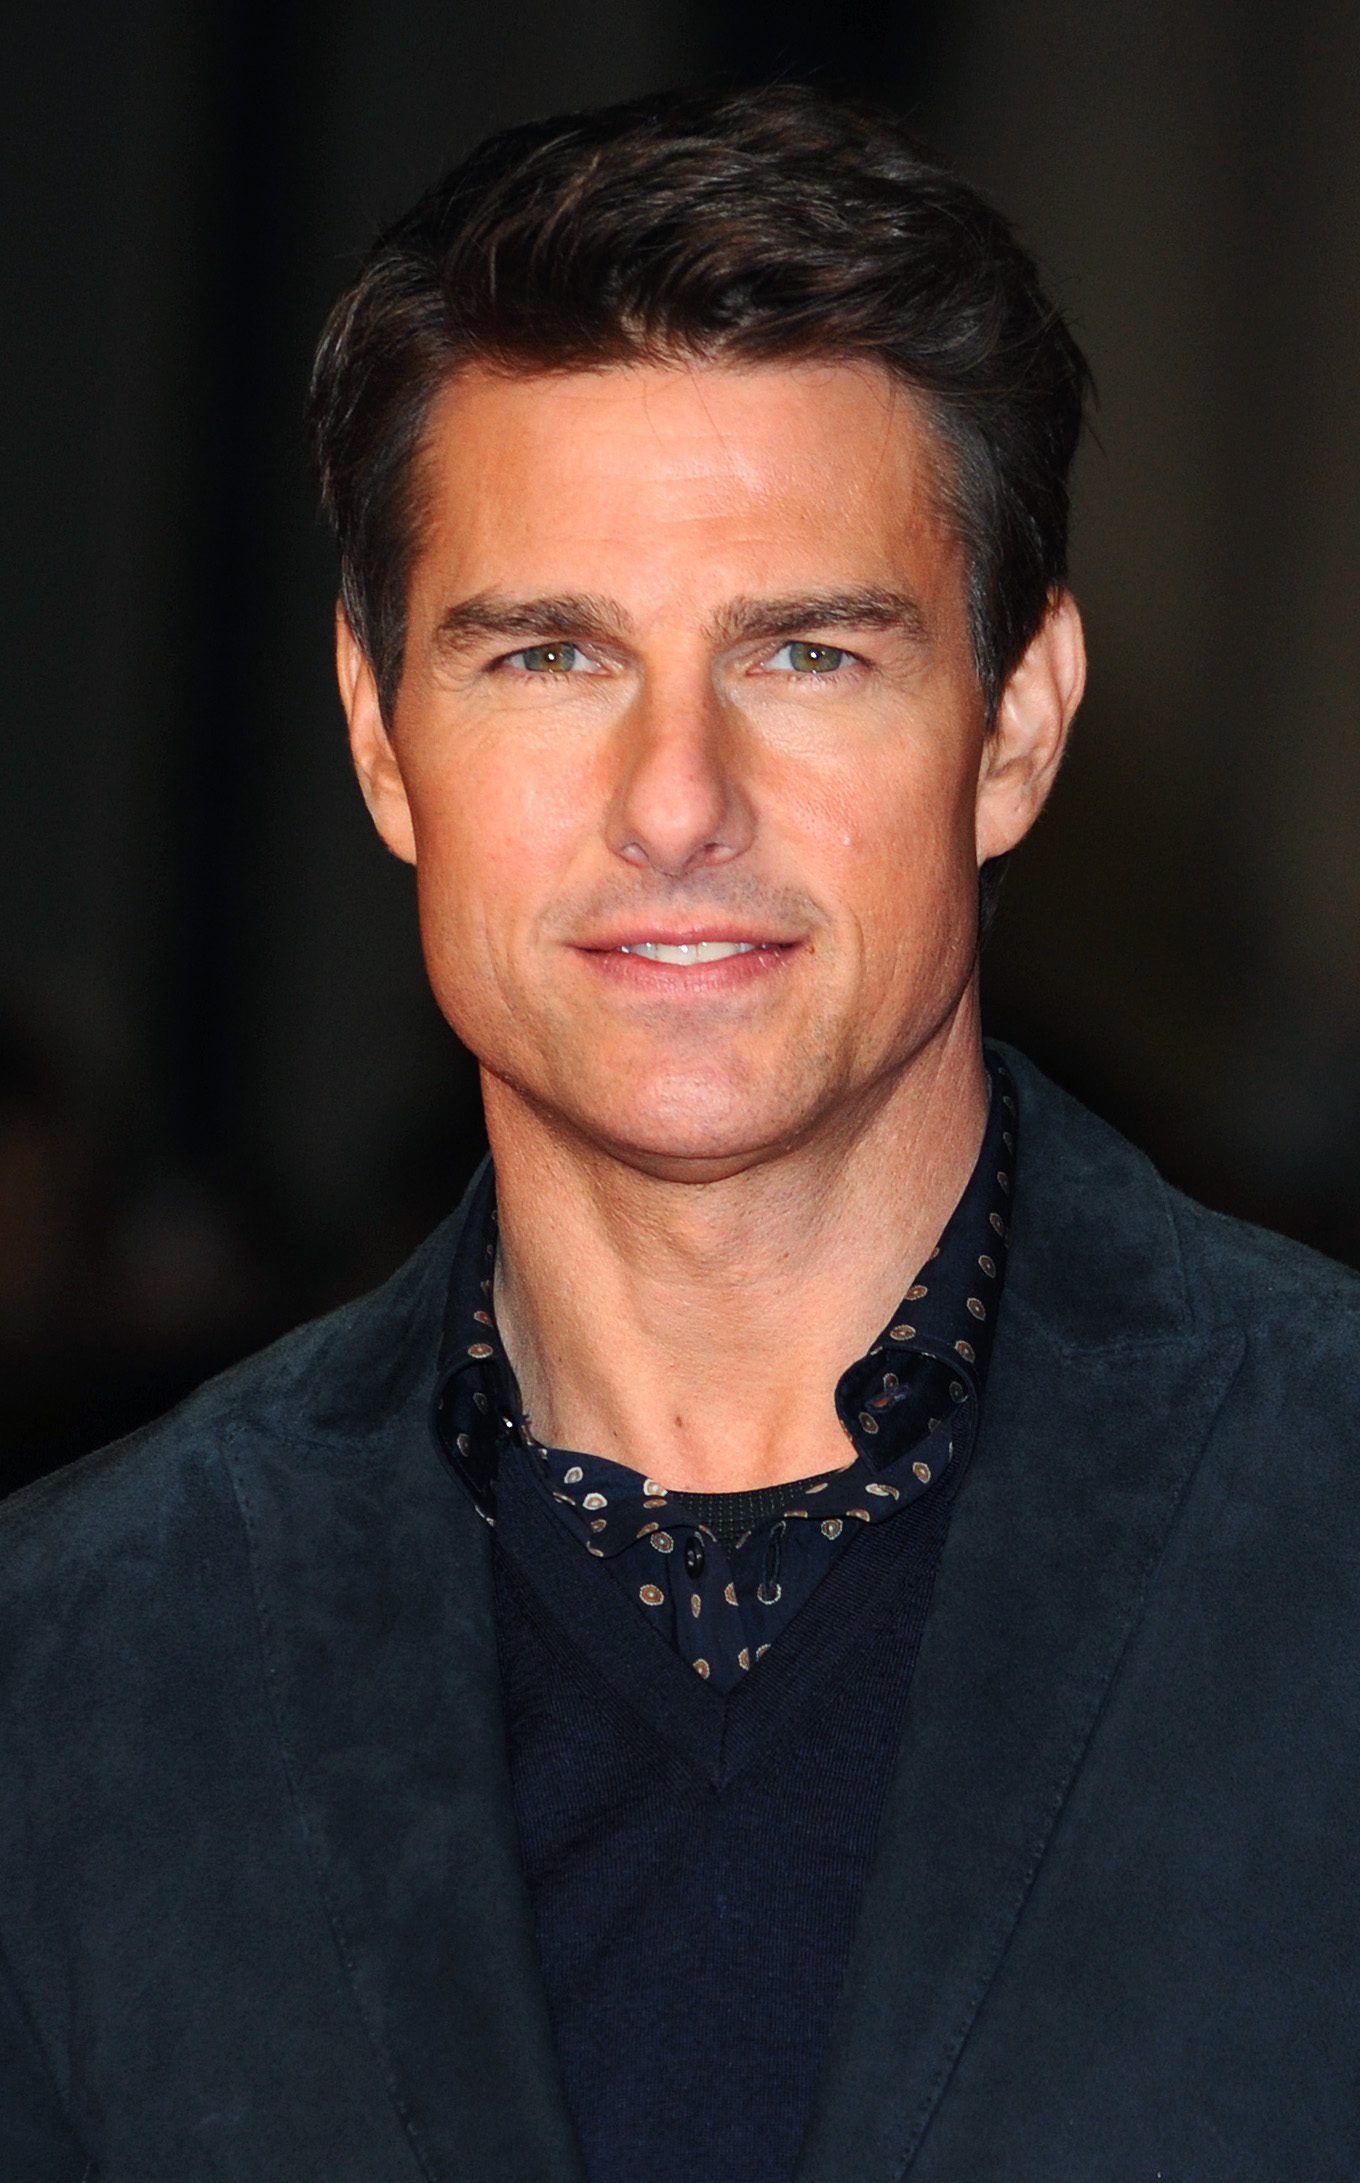 Tom Cruise attends the "Jack Reacher" premiere on December 10, 2012 in London, England | Source: Getty Images